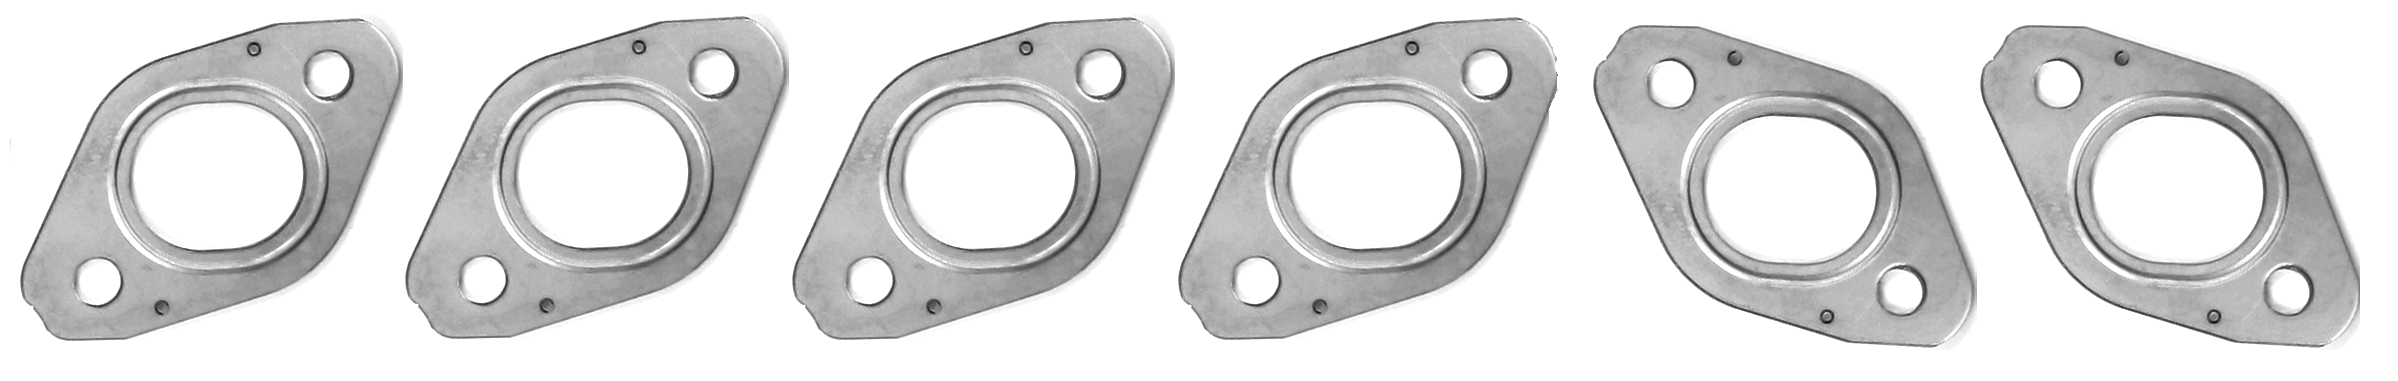 Nissan RB Exhaust Manifold Multi Layer Gasket